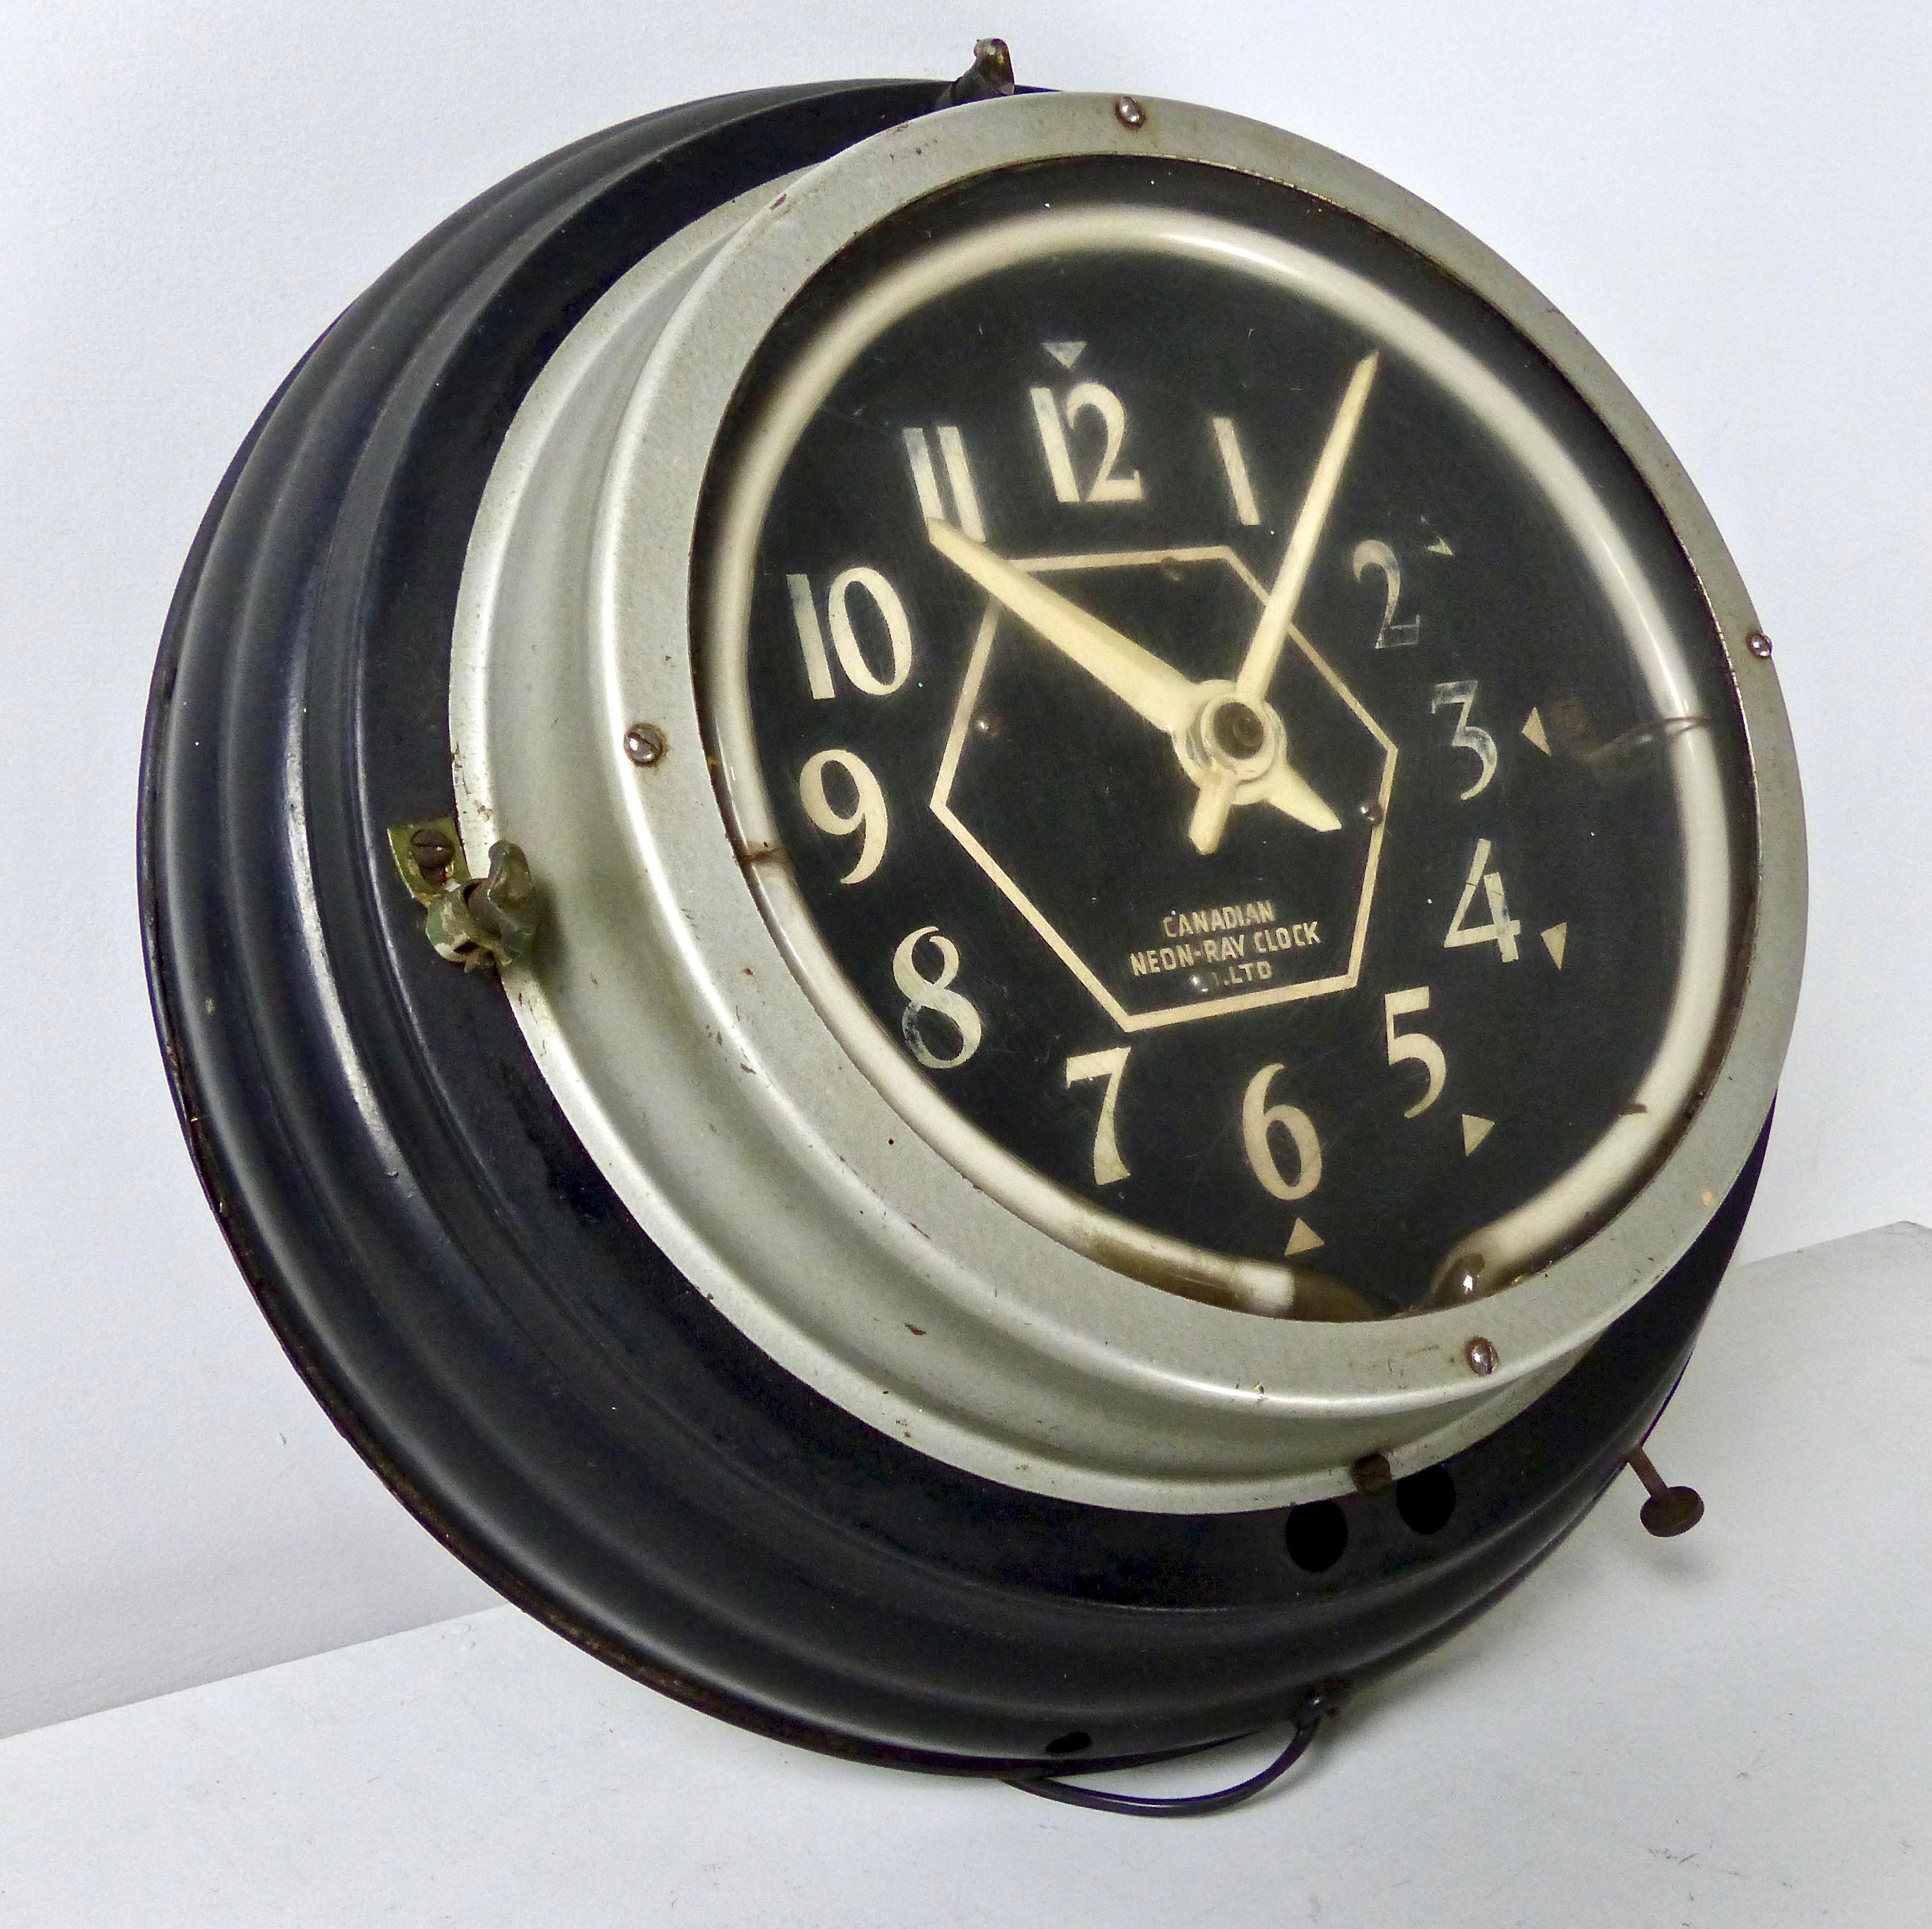 All original, working neon clock by Canadian Neon-Ray Clock Company, Montreal, Quebec. Metal housing is likely aluminium.
The company, whose clocks are in the Canadian Clock Museum, operated in Montreal between 1942 and the mid-1960s.